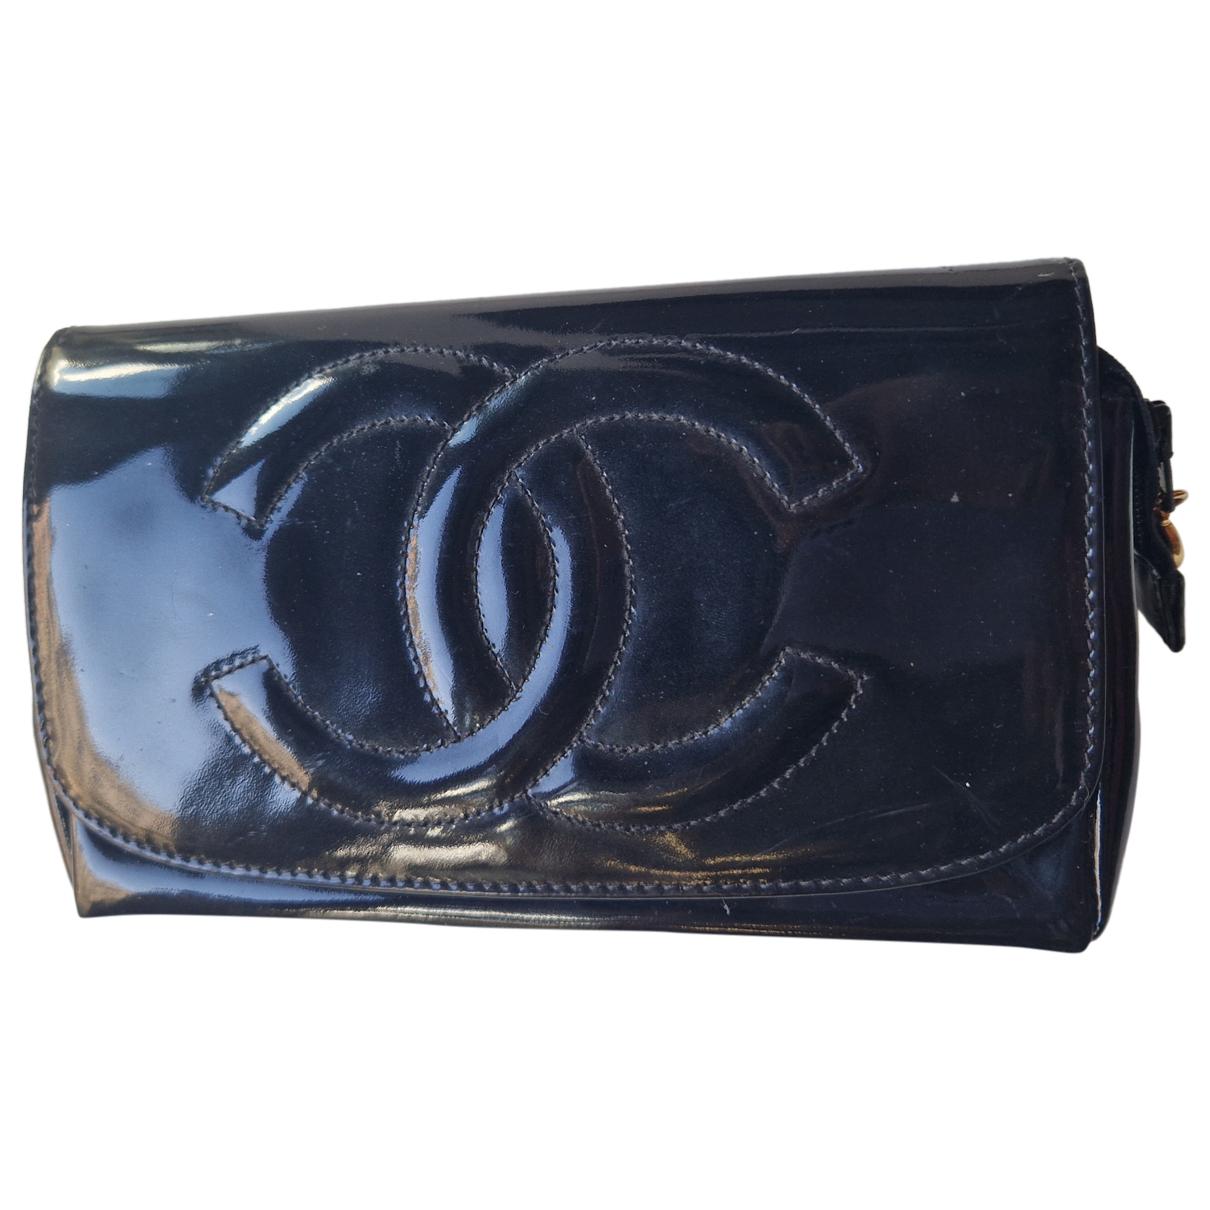 Chanel Patent Leather Long Zip Quilted Gala Clutch